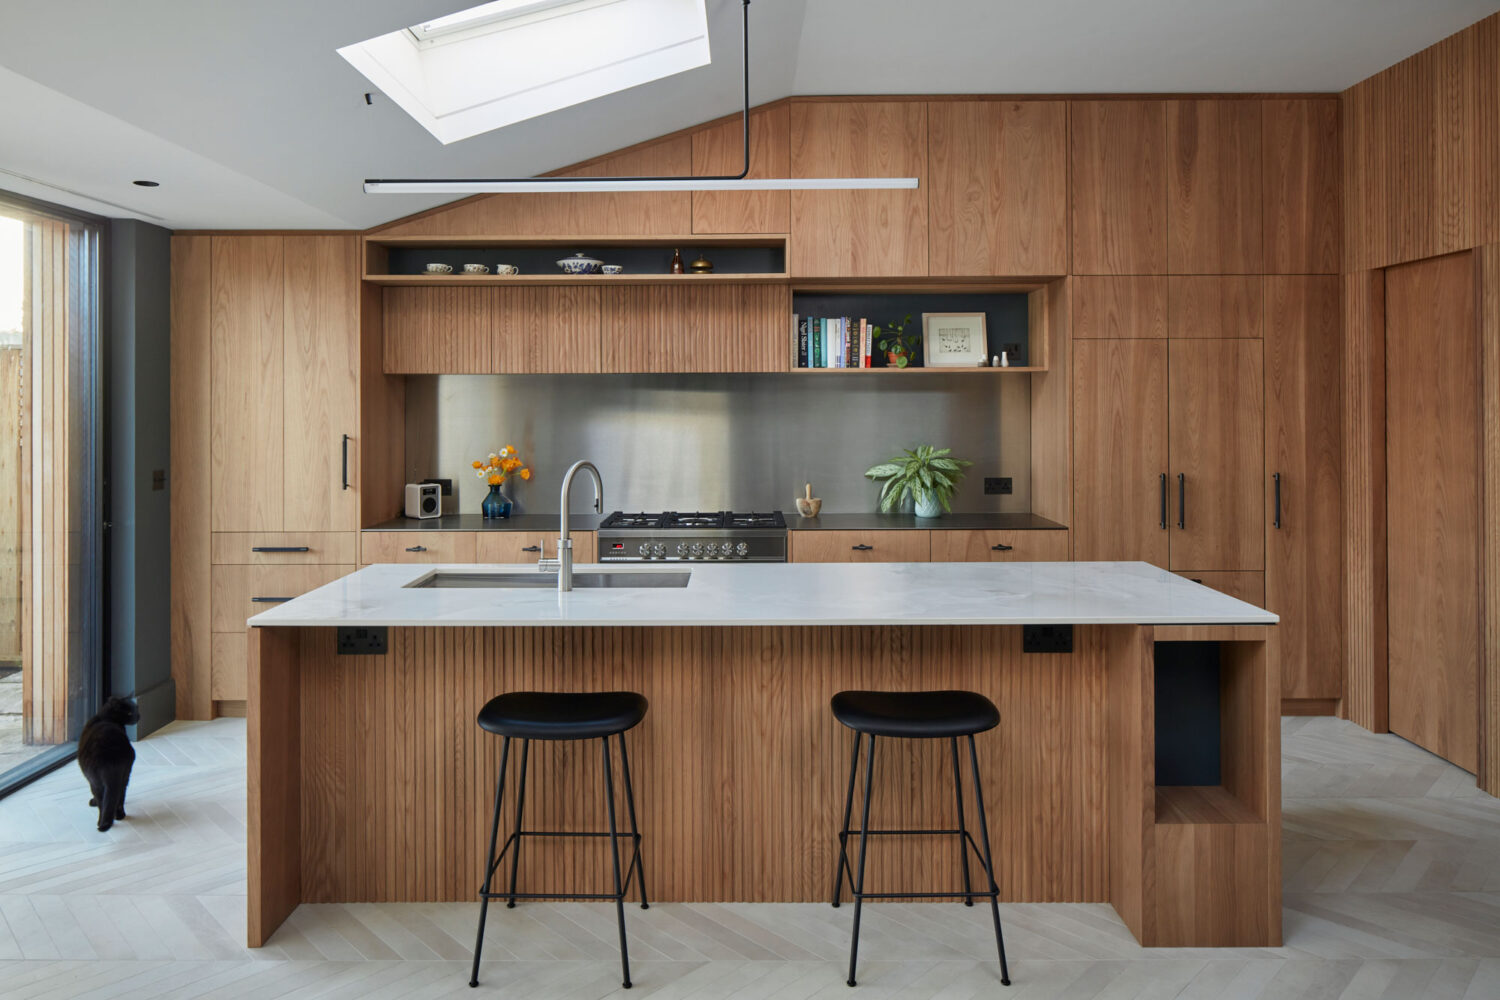 Kitchen with wooden cabinets and fluted details which has an island used for seating 